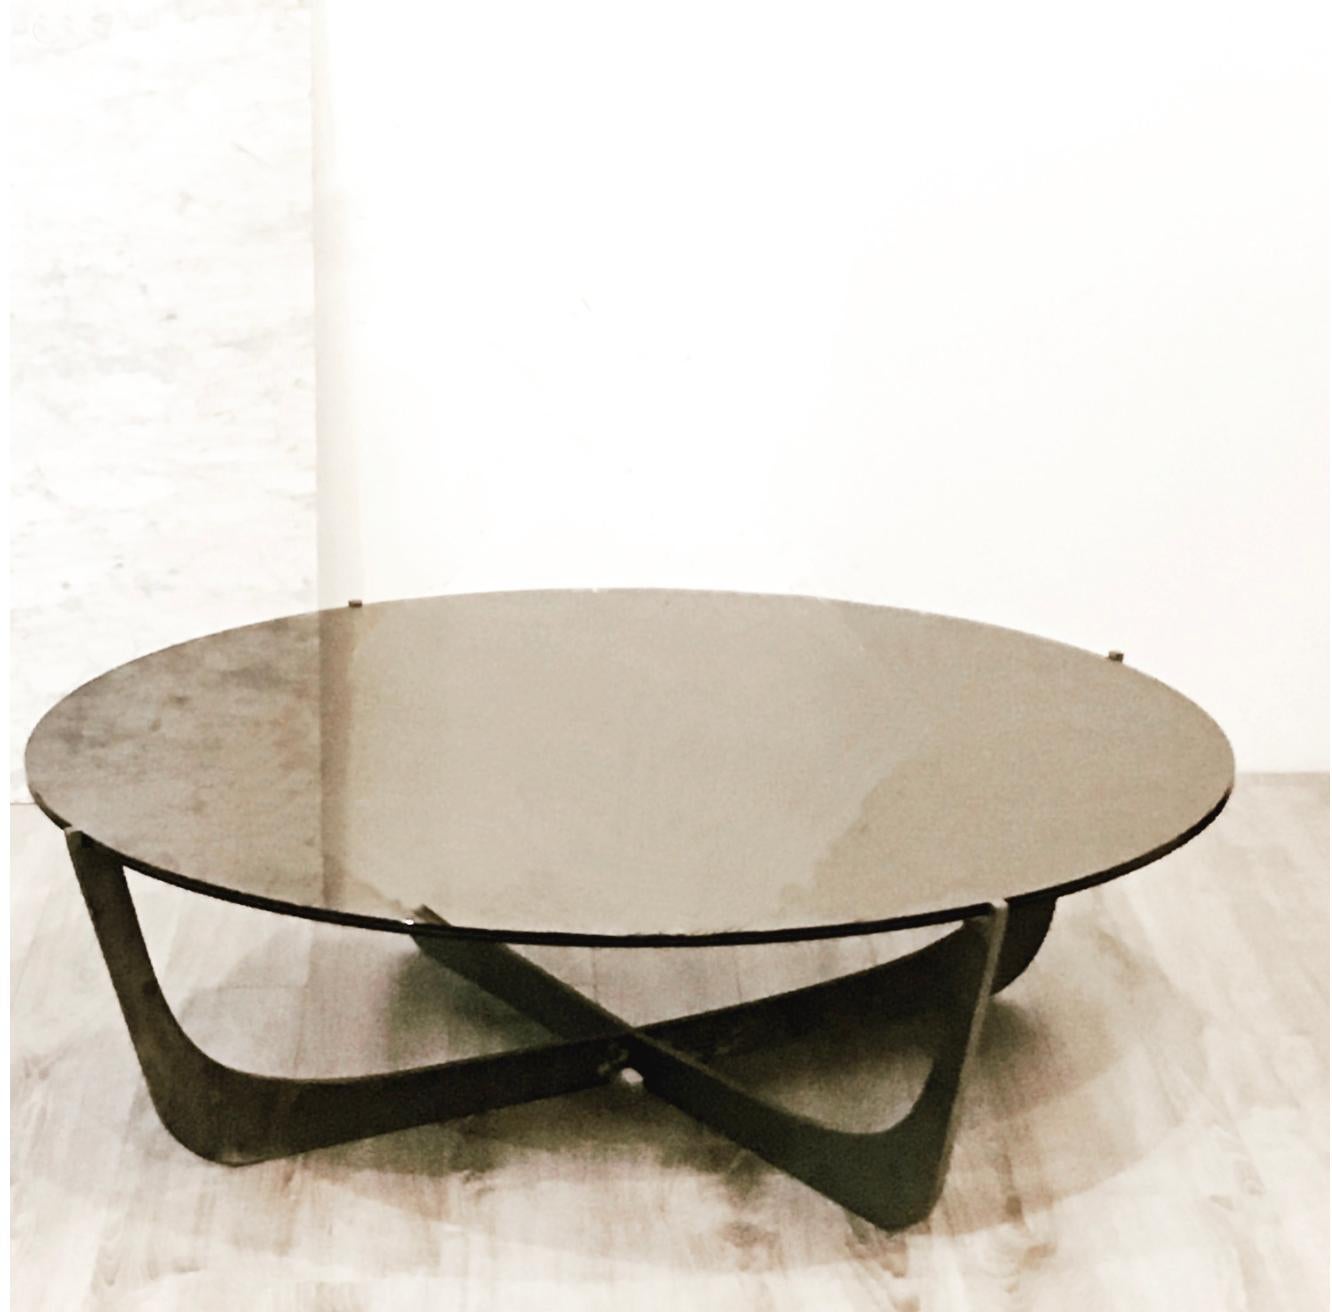 This steel and bronze glass coffee table is constructed of 1/4